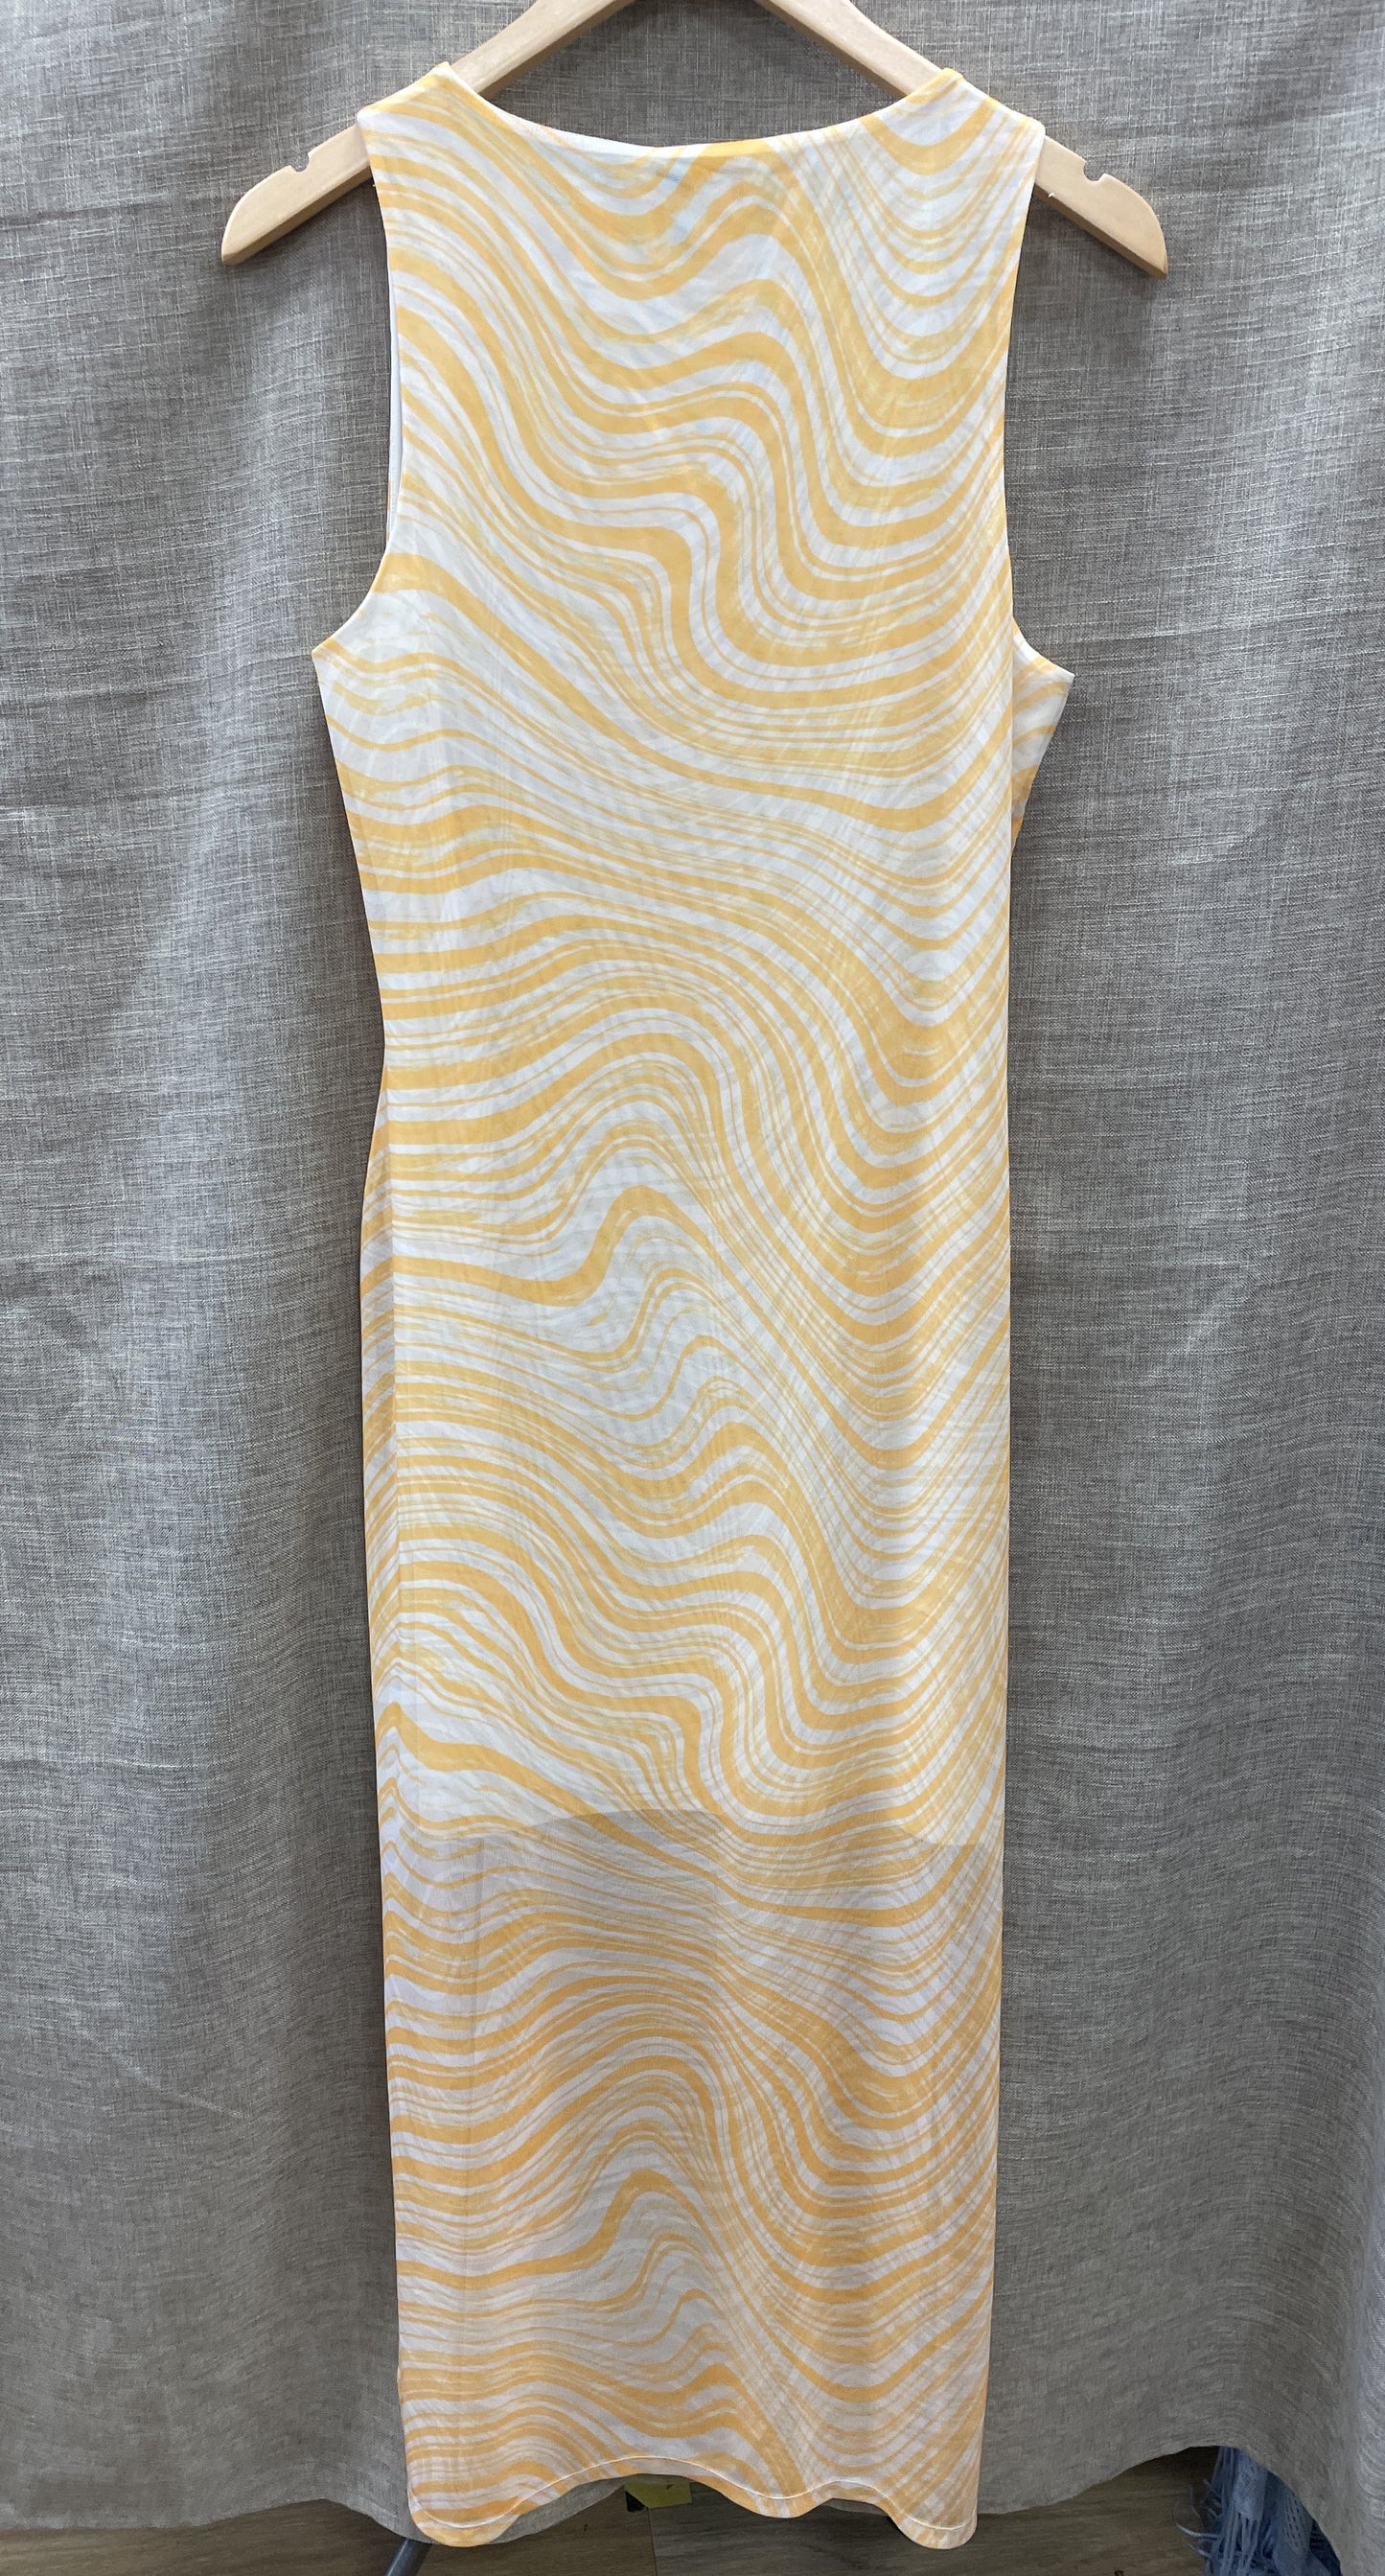 & Other Stories New with Tags Yellow & White Gauze Overlay Maxi Dress Medium